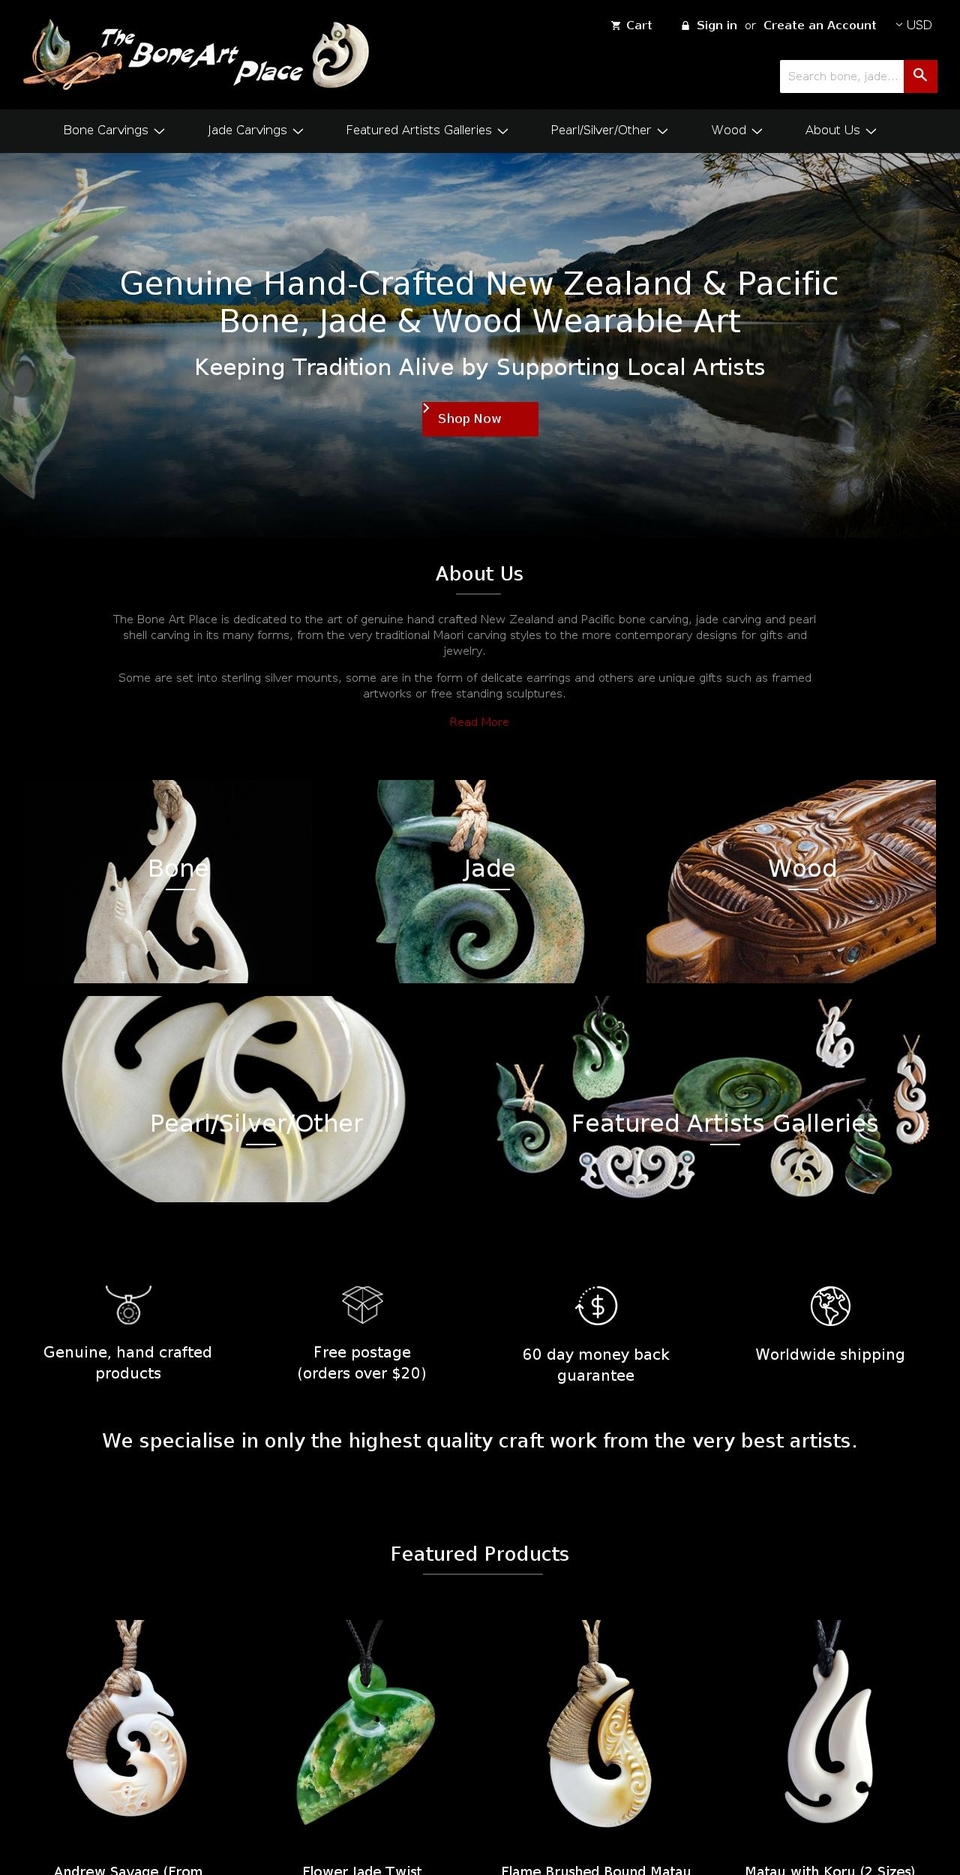 Supply Shopify theme site example boneart.co.nz